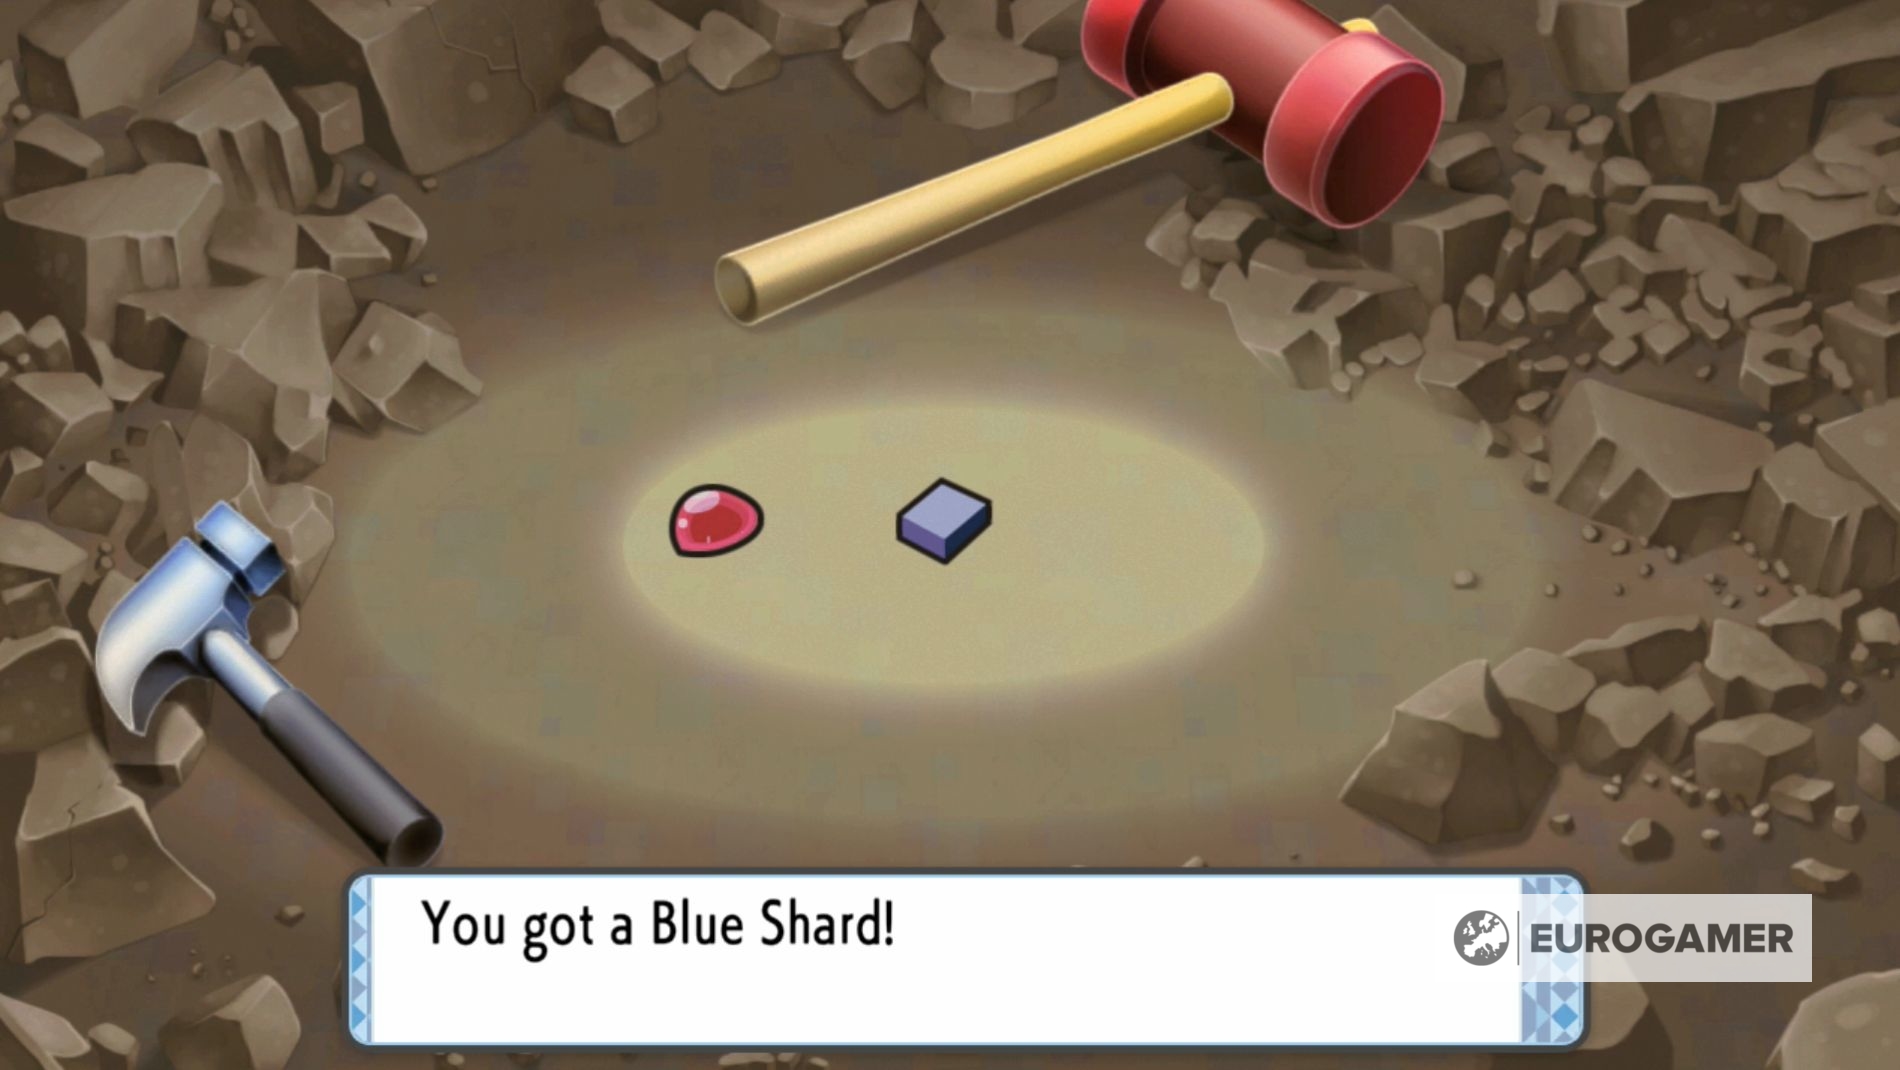 Grand Underground map how to dig and Secret Base statues in Pokémon Brilliant Diamond and Shining Pearl